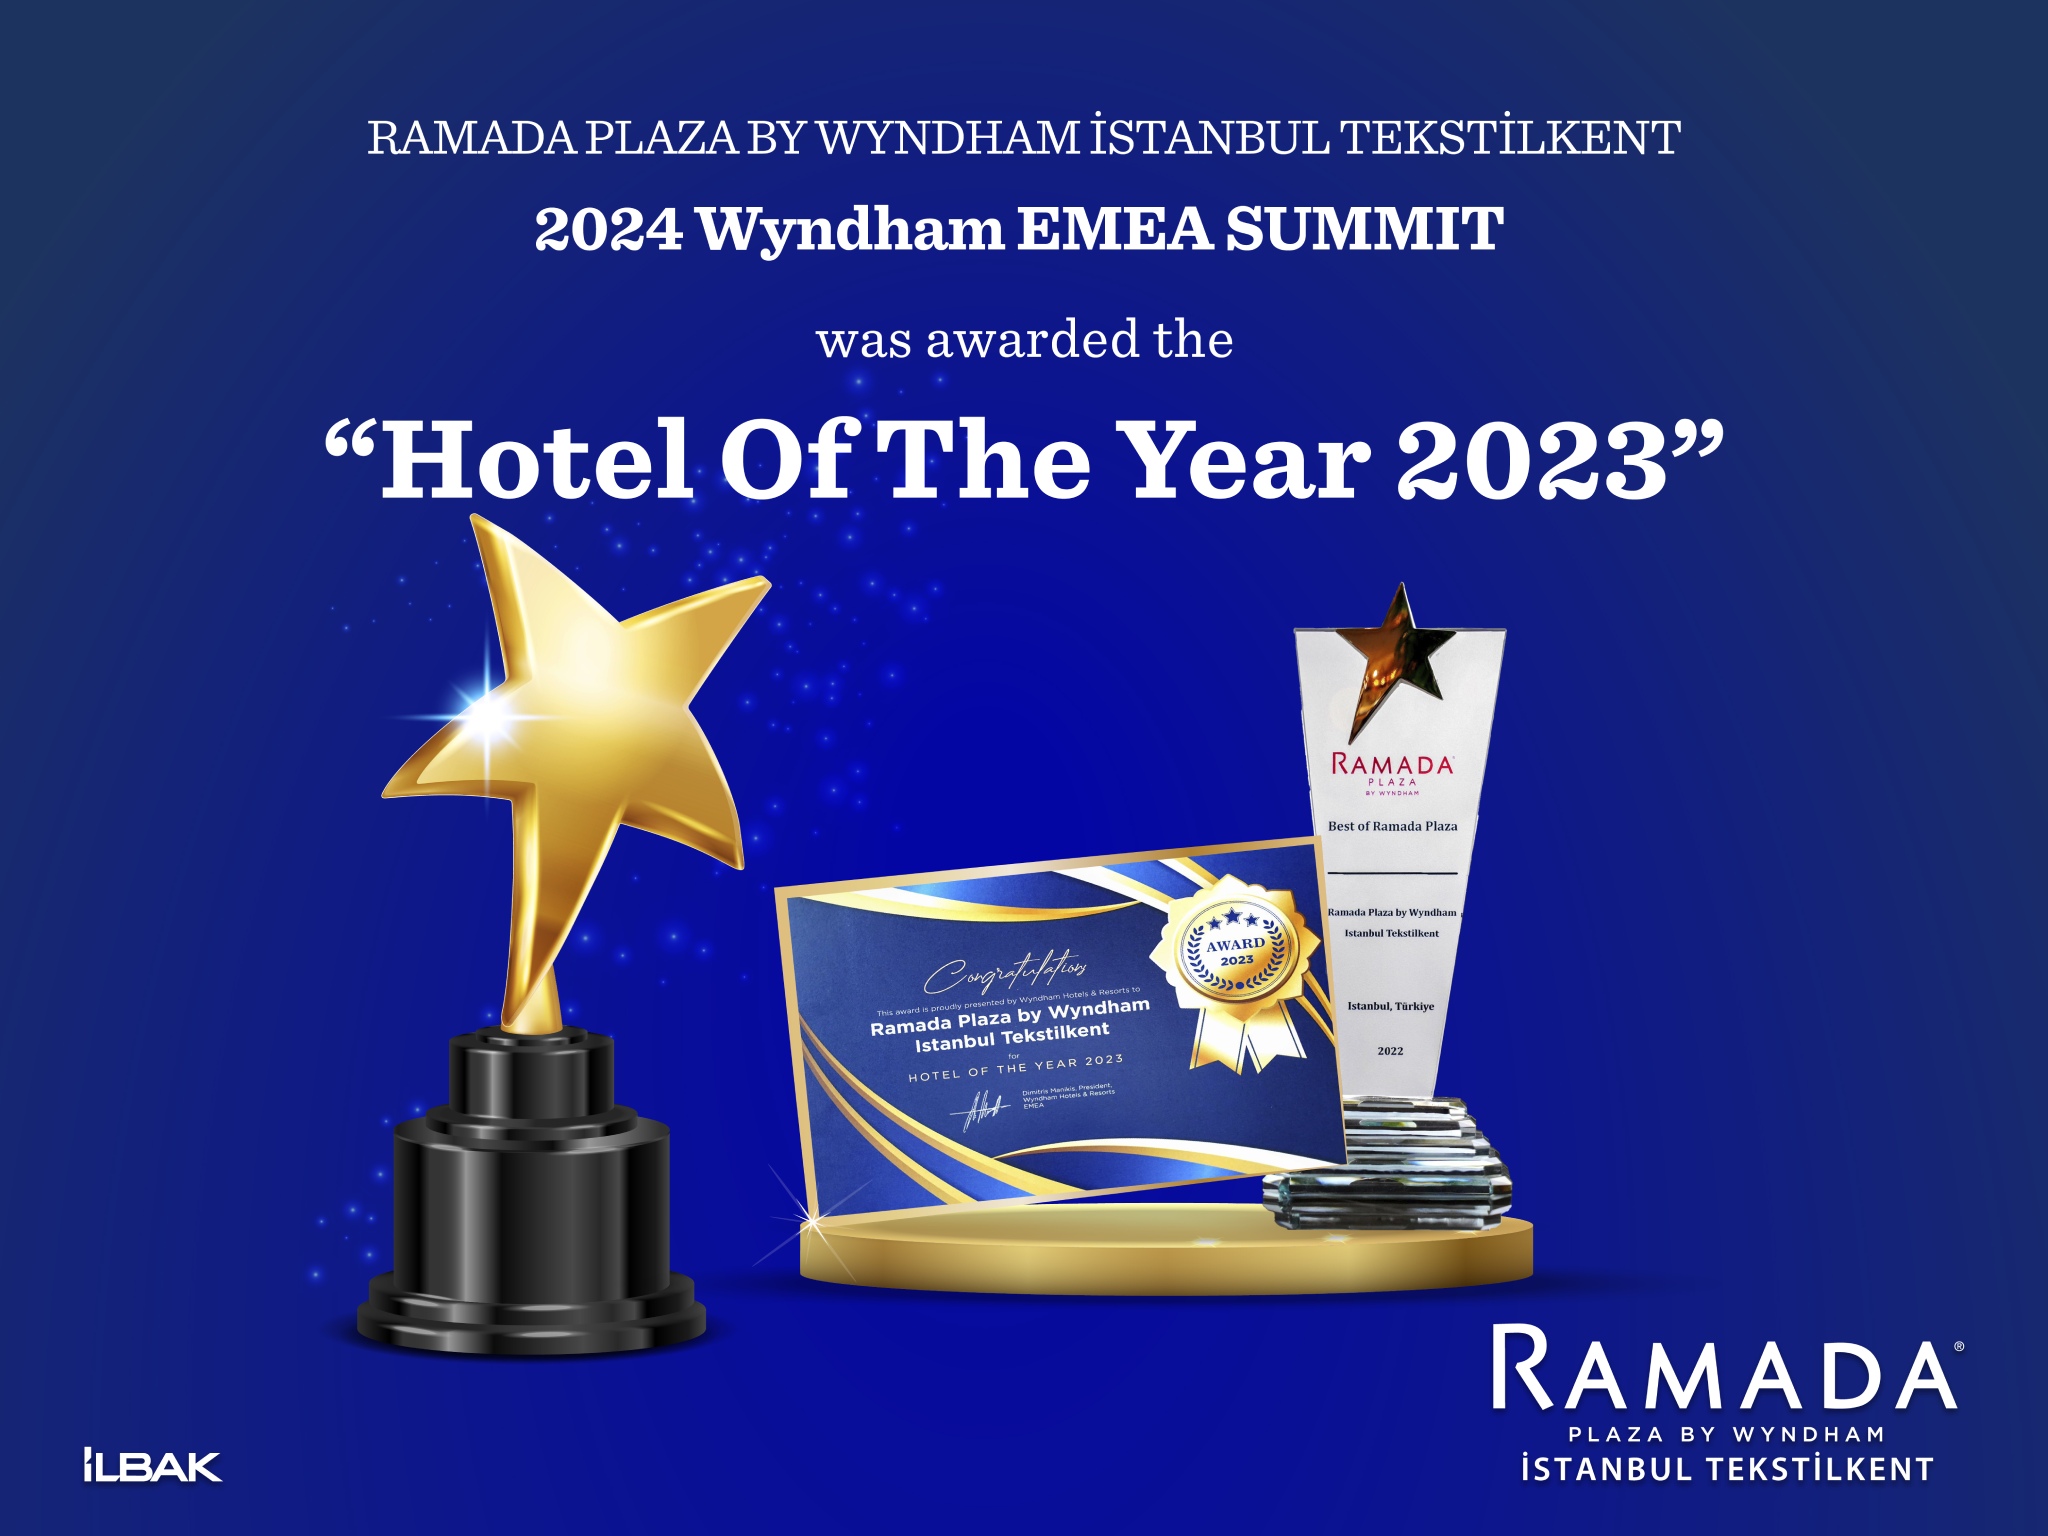 The "Hotel of the Year 2023" award